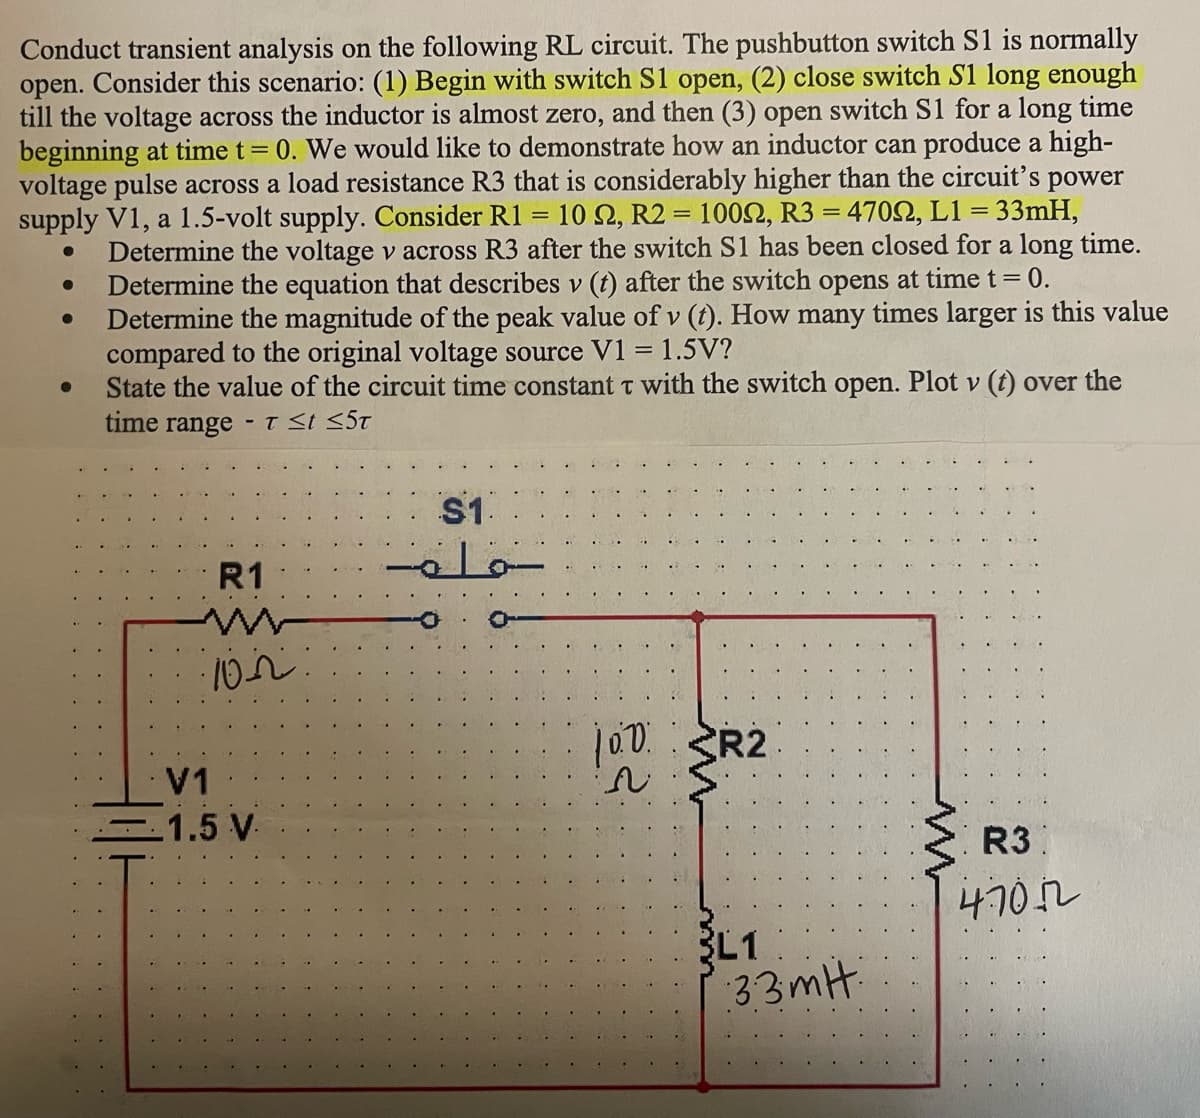 Conduct transient analysis on the following RL circuit. The pushbutton switch S1 is normally
open. Consider this scenario: (1) Begin with switch S1 open, (2) close switch S1 long enough
till the voltage across the inductor is almost zero, and then (3) open switch S1 for a long time
beginning at time t = 0. We would like to demonstrate how an inductor can produce a high-
voltage pulse across a load resistance R3 that is considerably higher than the circuit's power
supply V1, a 1.5-volt supply. Consider R1 = 10 22, R2 = 10022, R3 = 47022, L1 = 33mH,
Determine the voltage v across R3 after the switch S1 has been closed for a long time.
Determine the equation that describes v (t) after the switch opens at time t = 0.
Determine the magnitude of the peak value of v (t). How many times larger is this value
compared to the original voltage source V1 = 1.5V?
State the value of the circuit time constant T with the switch open. Plot v (t) over the
time range
●
●
-
T ≤t ≤5T
R1
www
102
V1
1.5 V.
S1.
مام
100 SR2
N
3L1
33mH:
ww
R3
47072